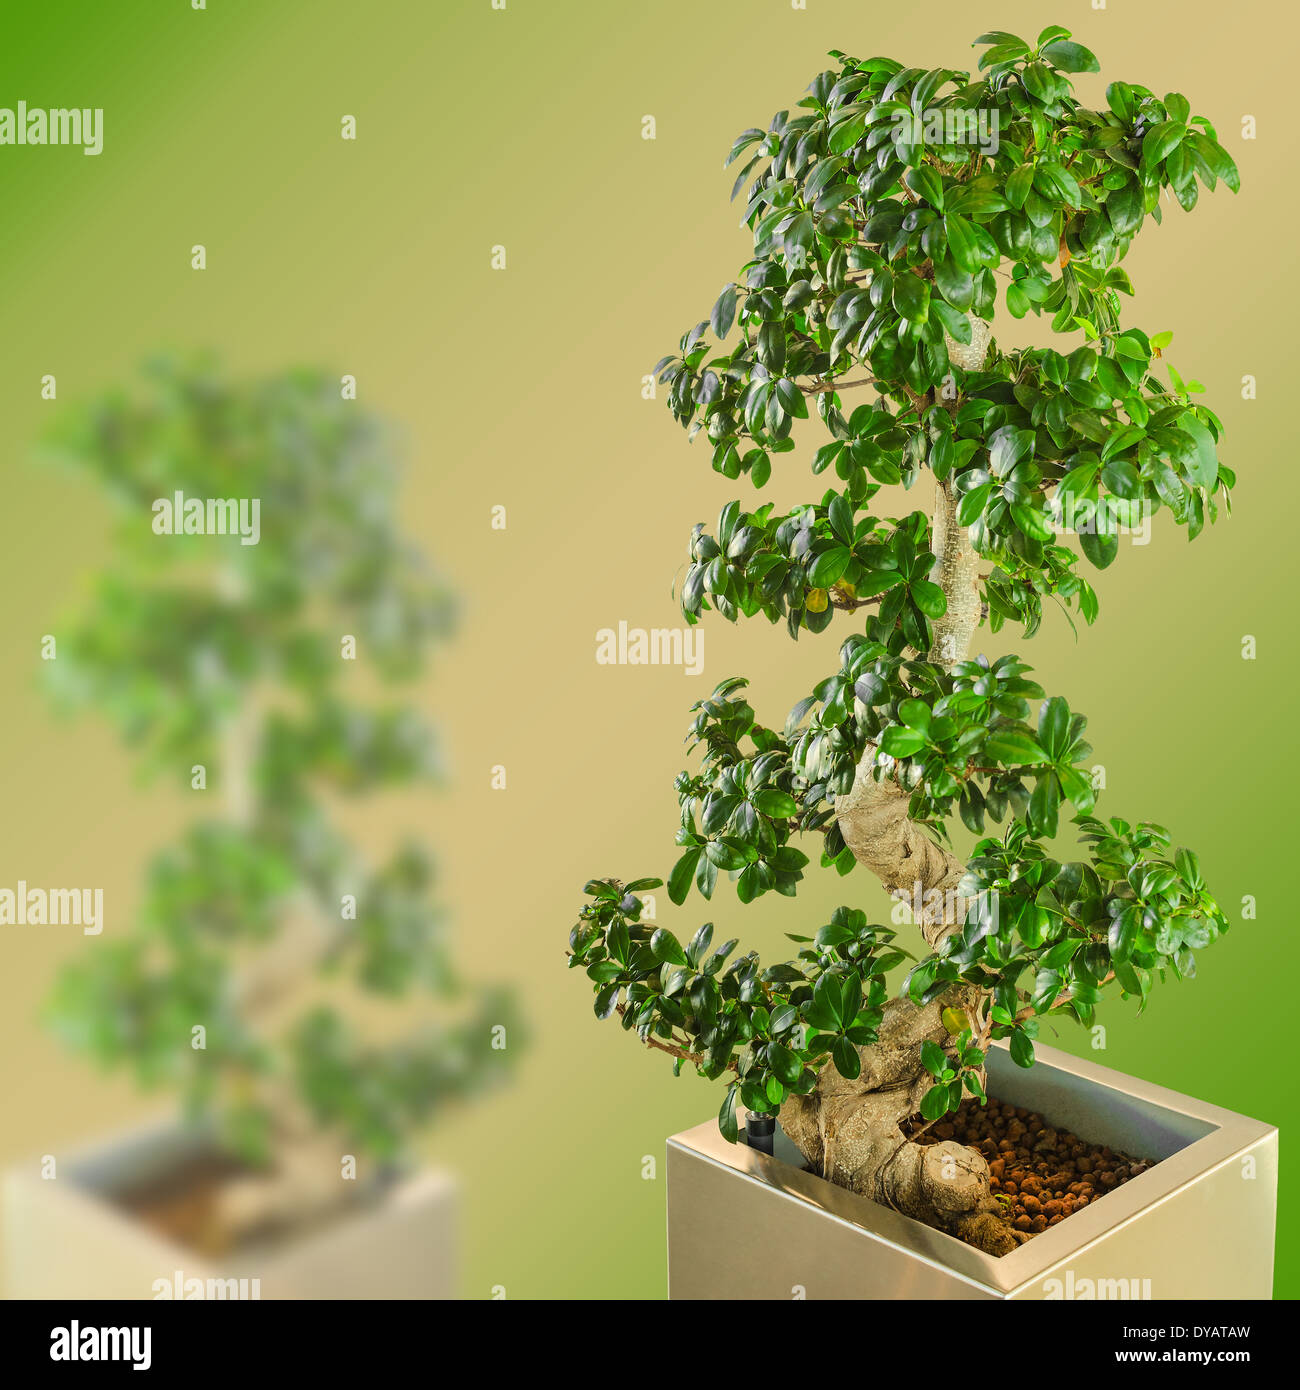 Ficus bonsai dwarf tree on gradient blurred background with free place for copy-space your text Stock Photo